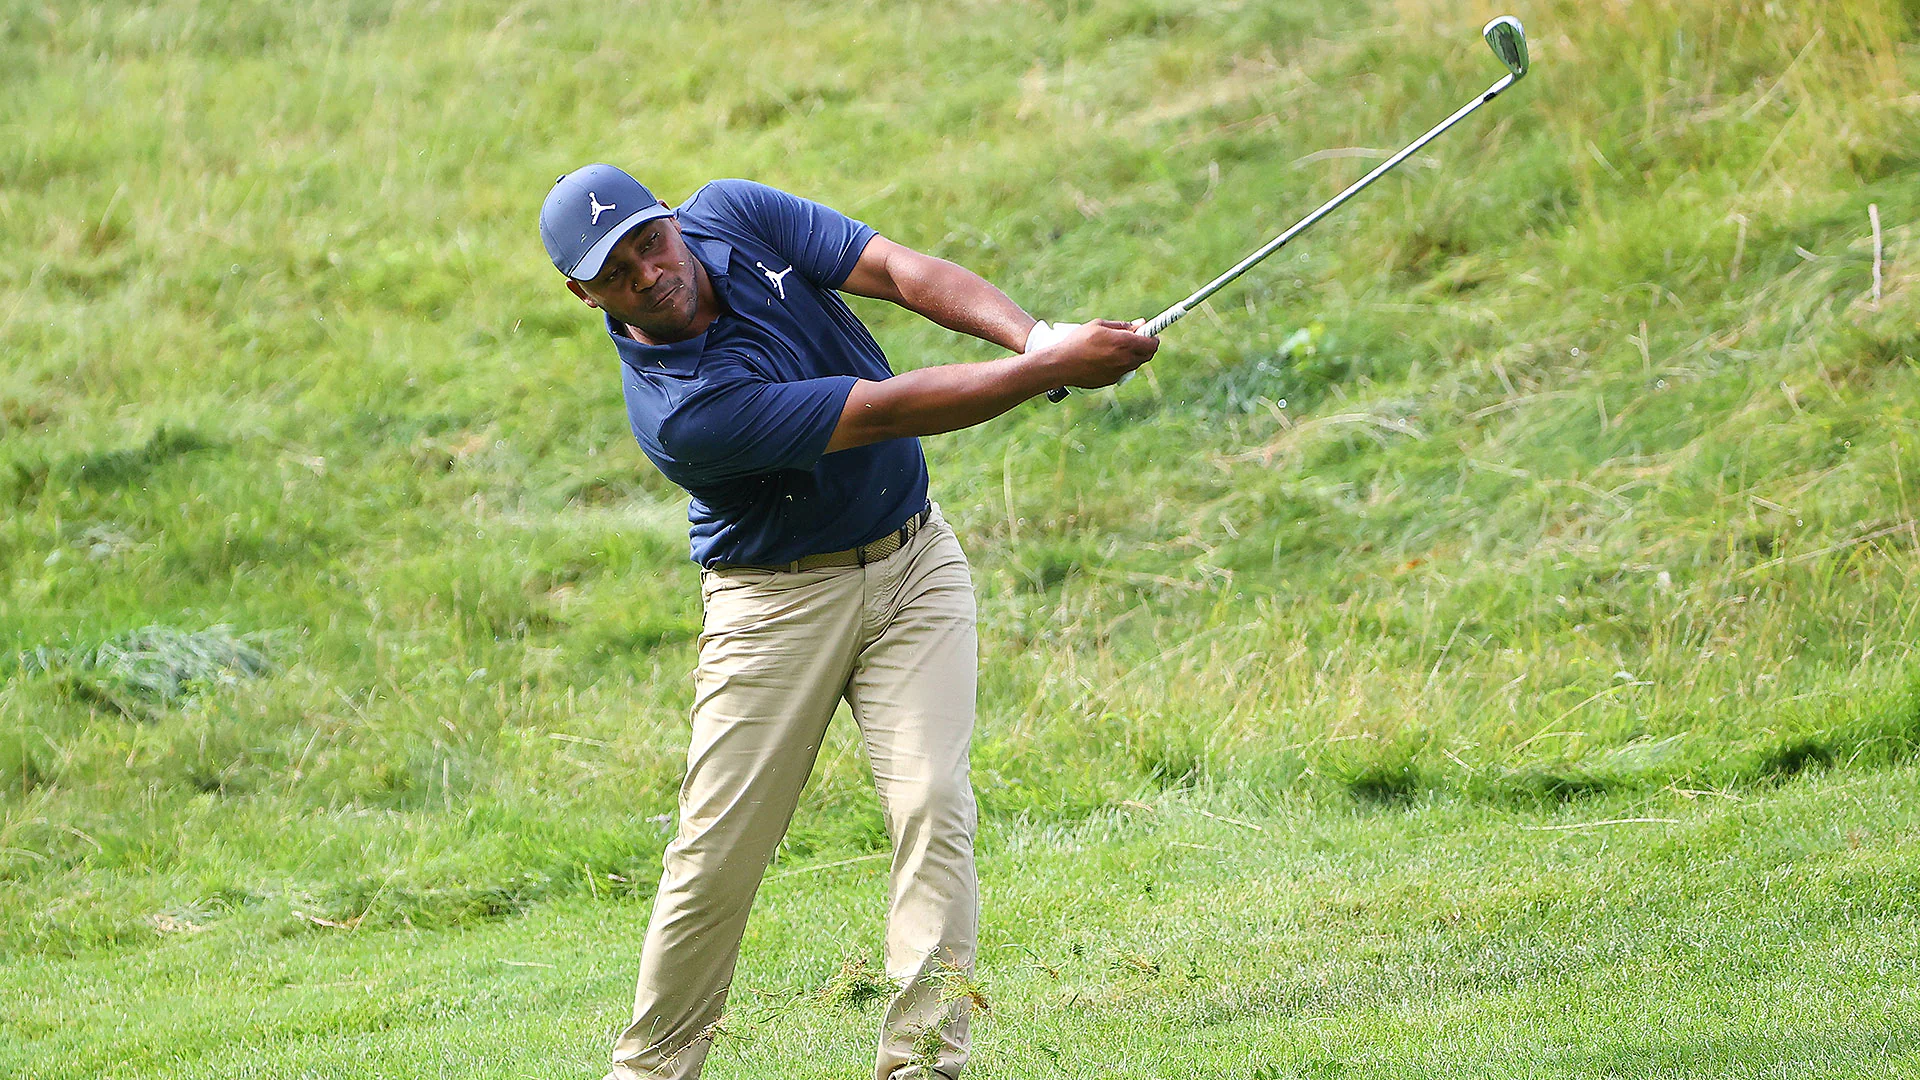 Harold Varner III ditches ‘terrible attitude’ from last week, fires 66 at Northern Trust